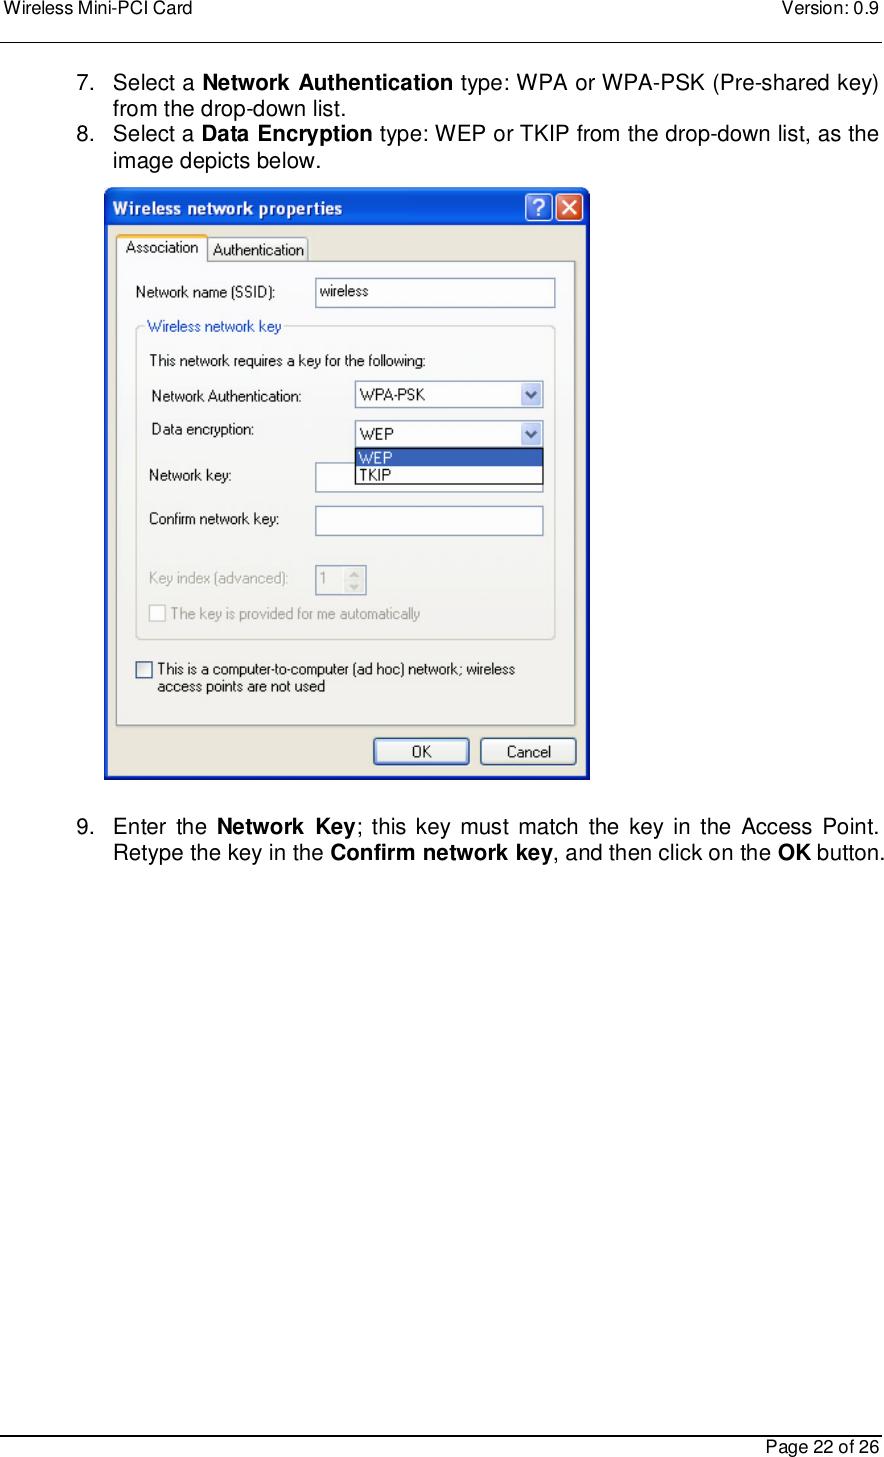 Wireless Mini-PCI Card    Version: 0.9    Page 22 of 26 7.  Select a Network Authentication type: WPA or WPA-PSK (Pre-shared key) from the drop-down list. 8.  Select a Data Encryption type: WEP or TKIP from the drop-down list, as the image depicts below.                          9.  Enter  the Network  Key; this key  must  match the key in  the Access  Point. Retype the key in the Confirm network key, and then click on the OK button.    